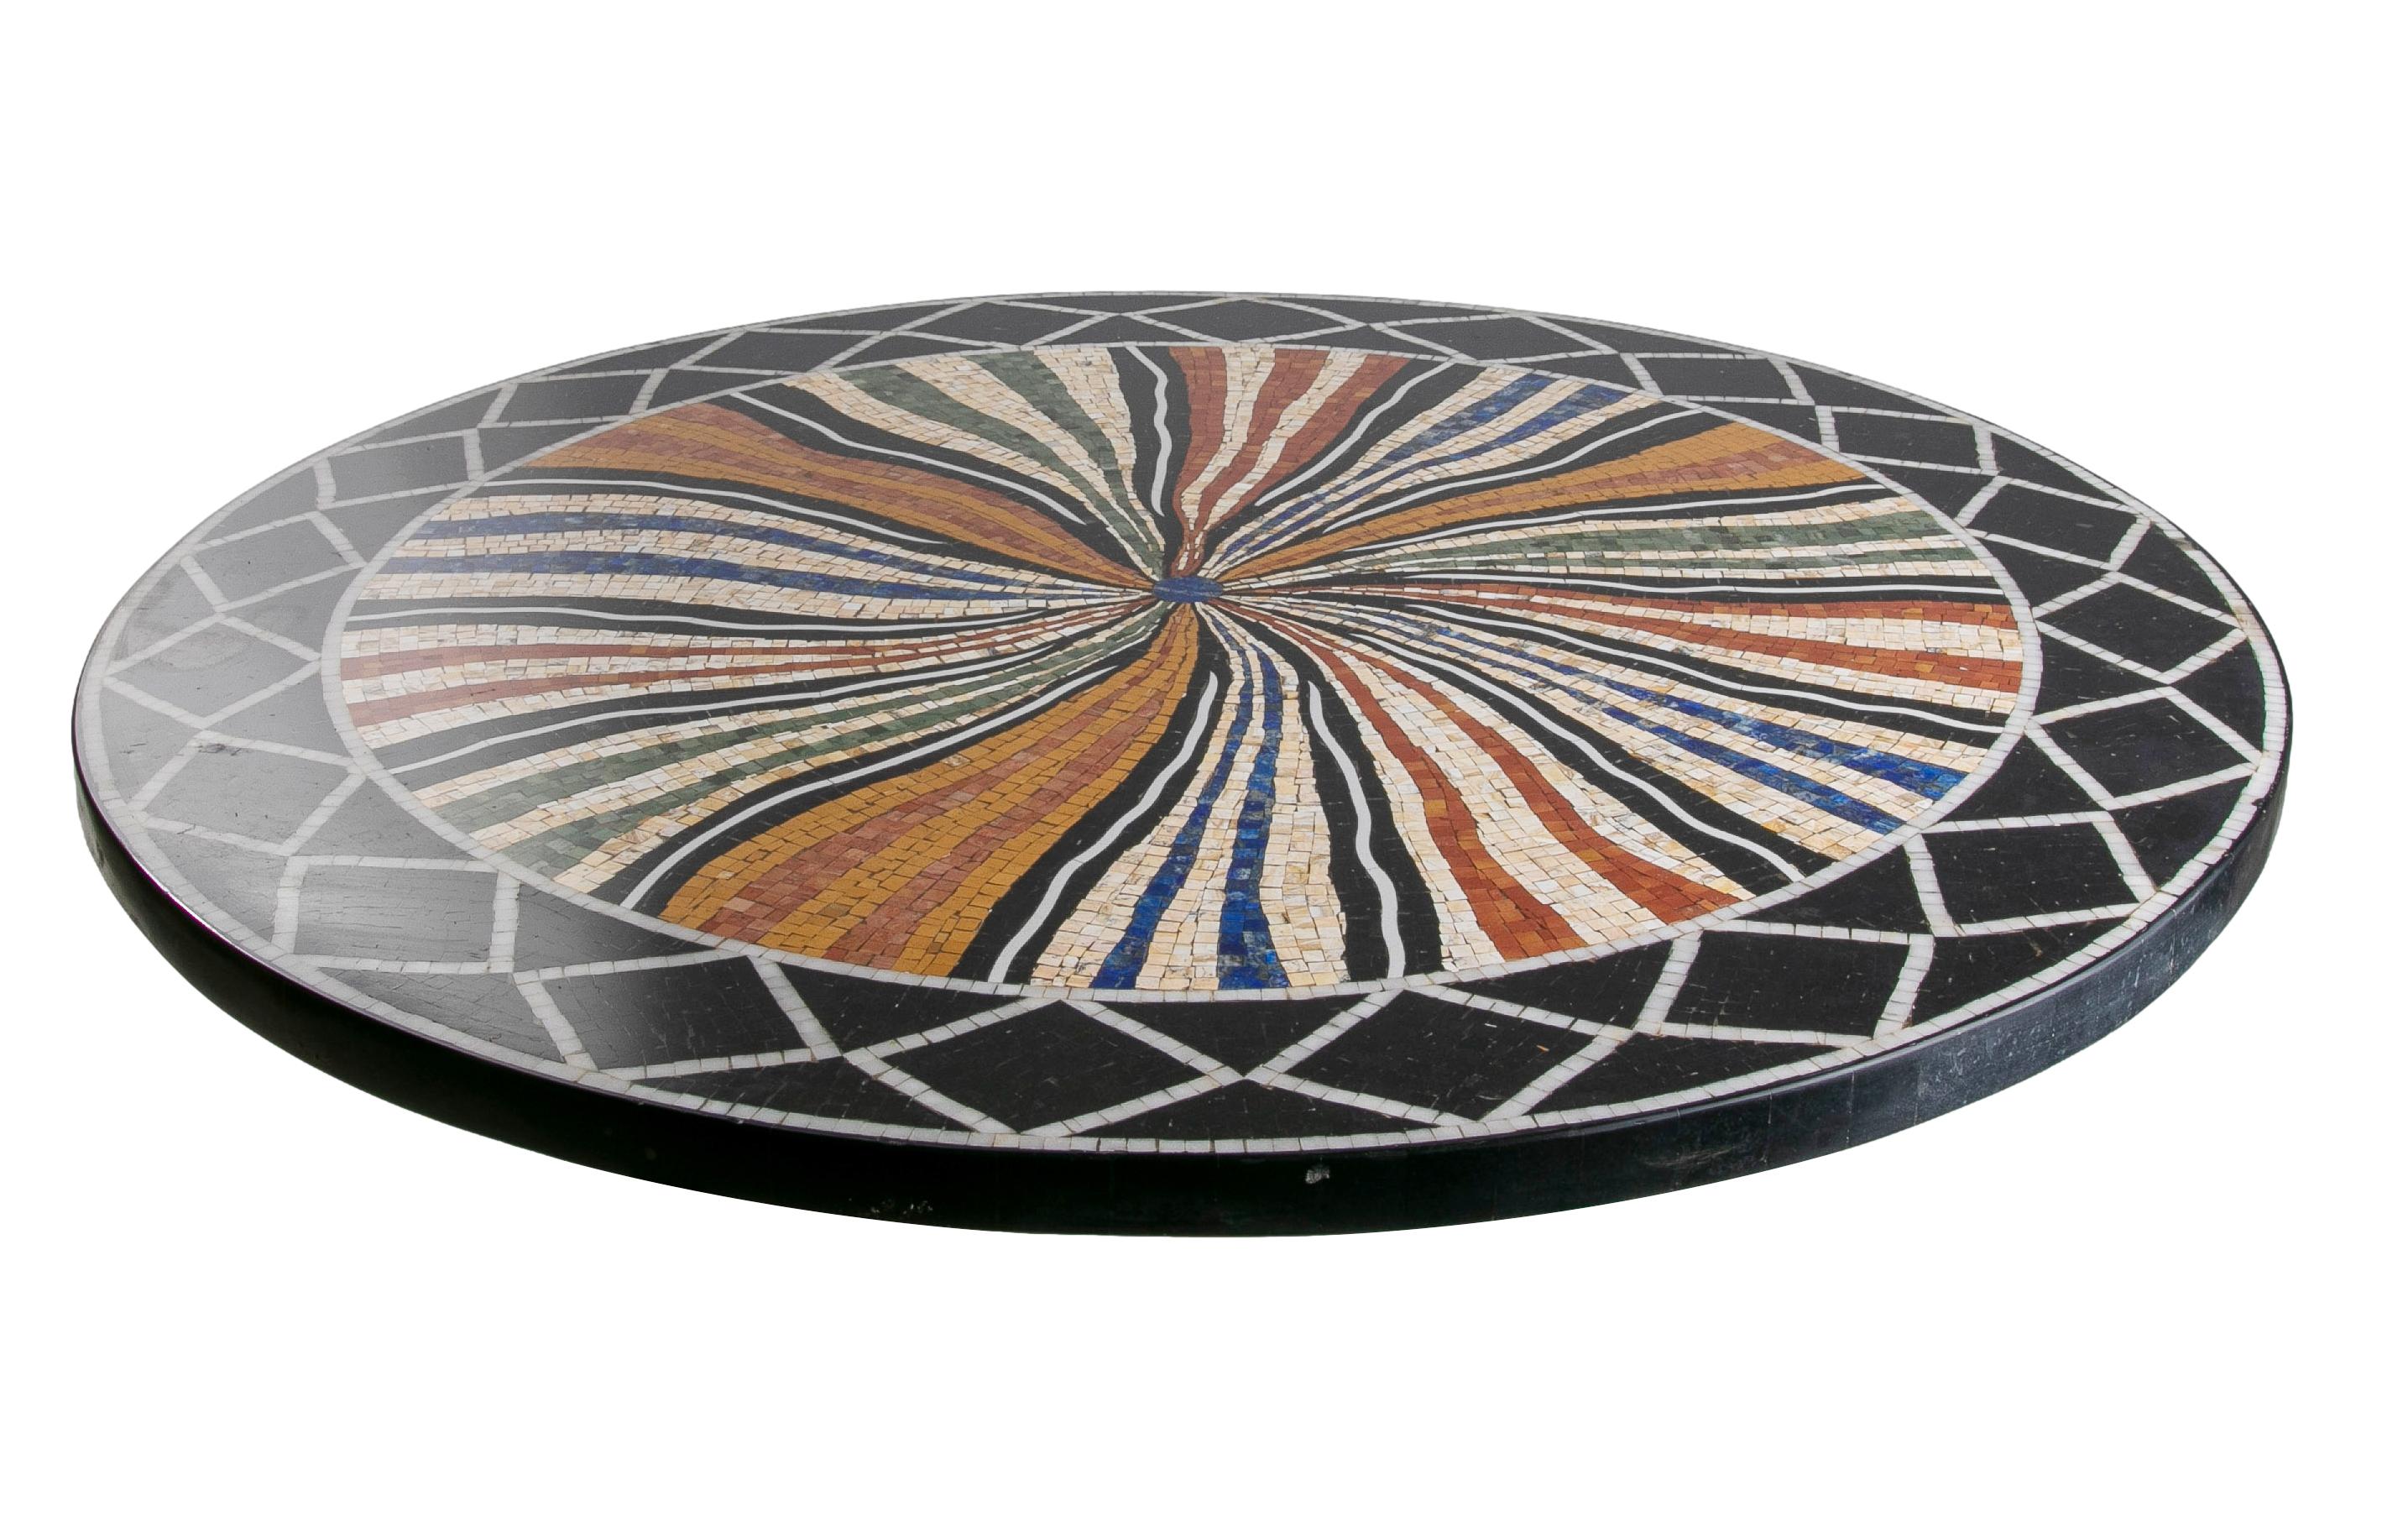 Handcrafted 1990s Spanish classical Roman mosaic round marble table top with lapis lazuli semiprecious gemstones and an assortment of coloured marbles.